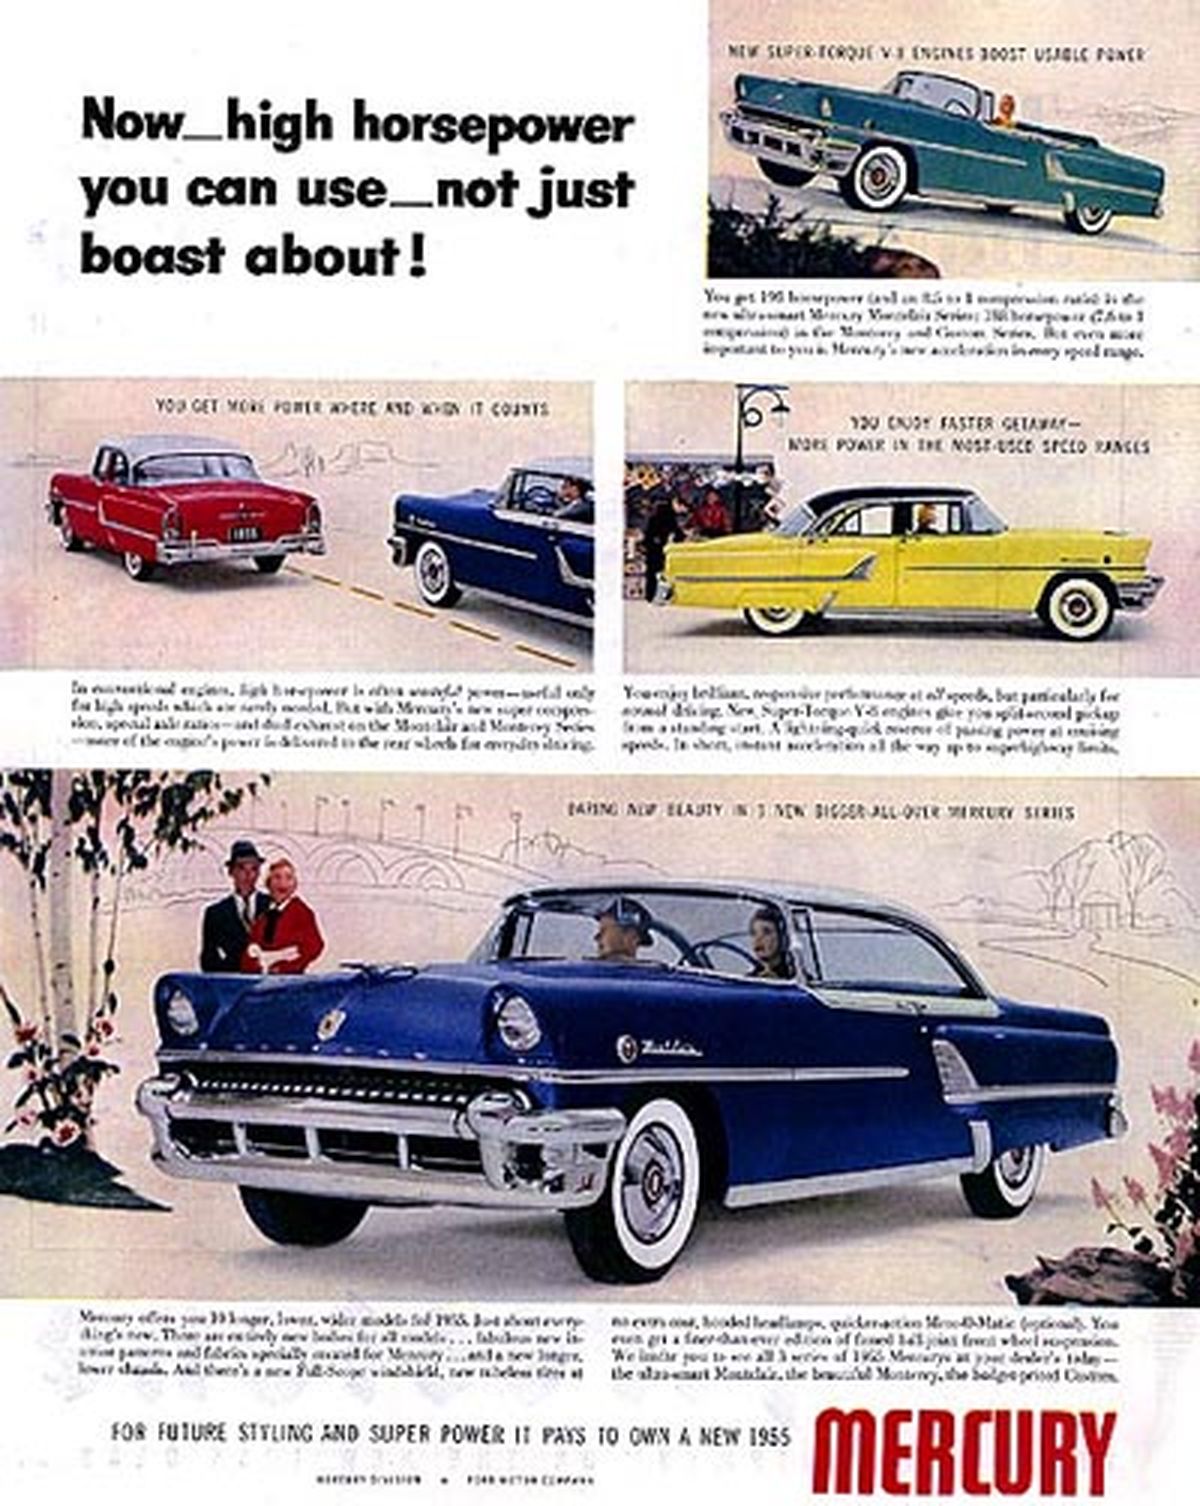  Advertisement for the great looking 1955 Mercury line features two tone paint and several models to choose from. ( Ford Motor Company)